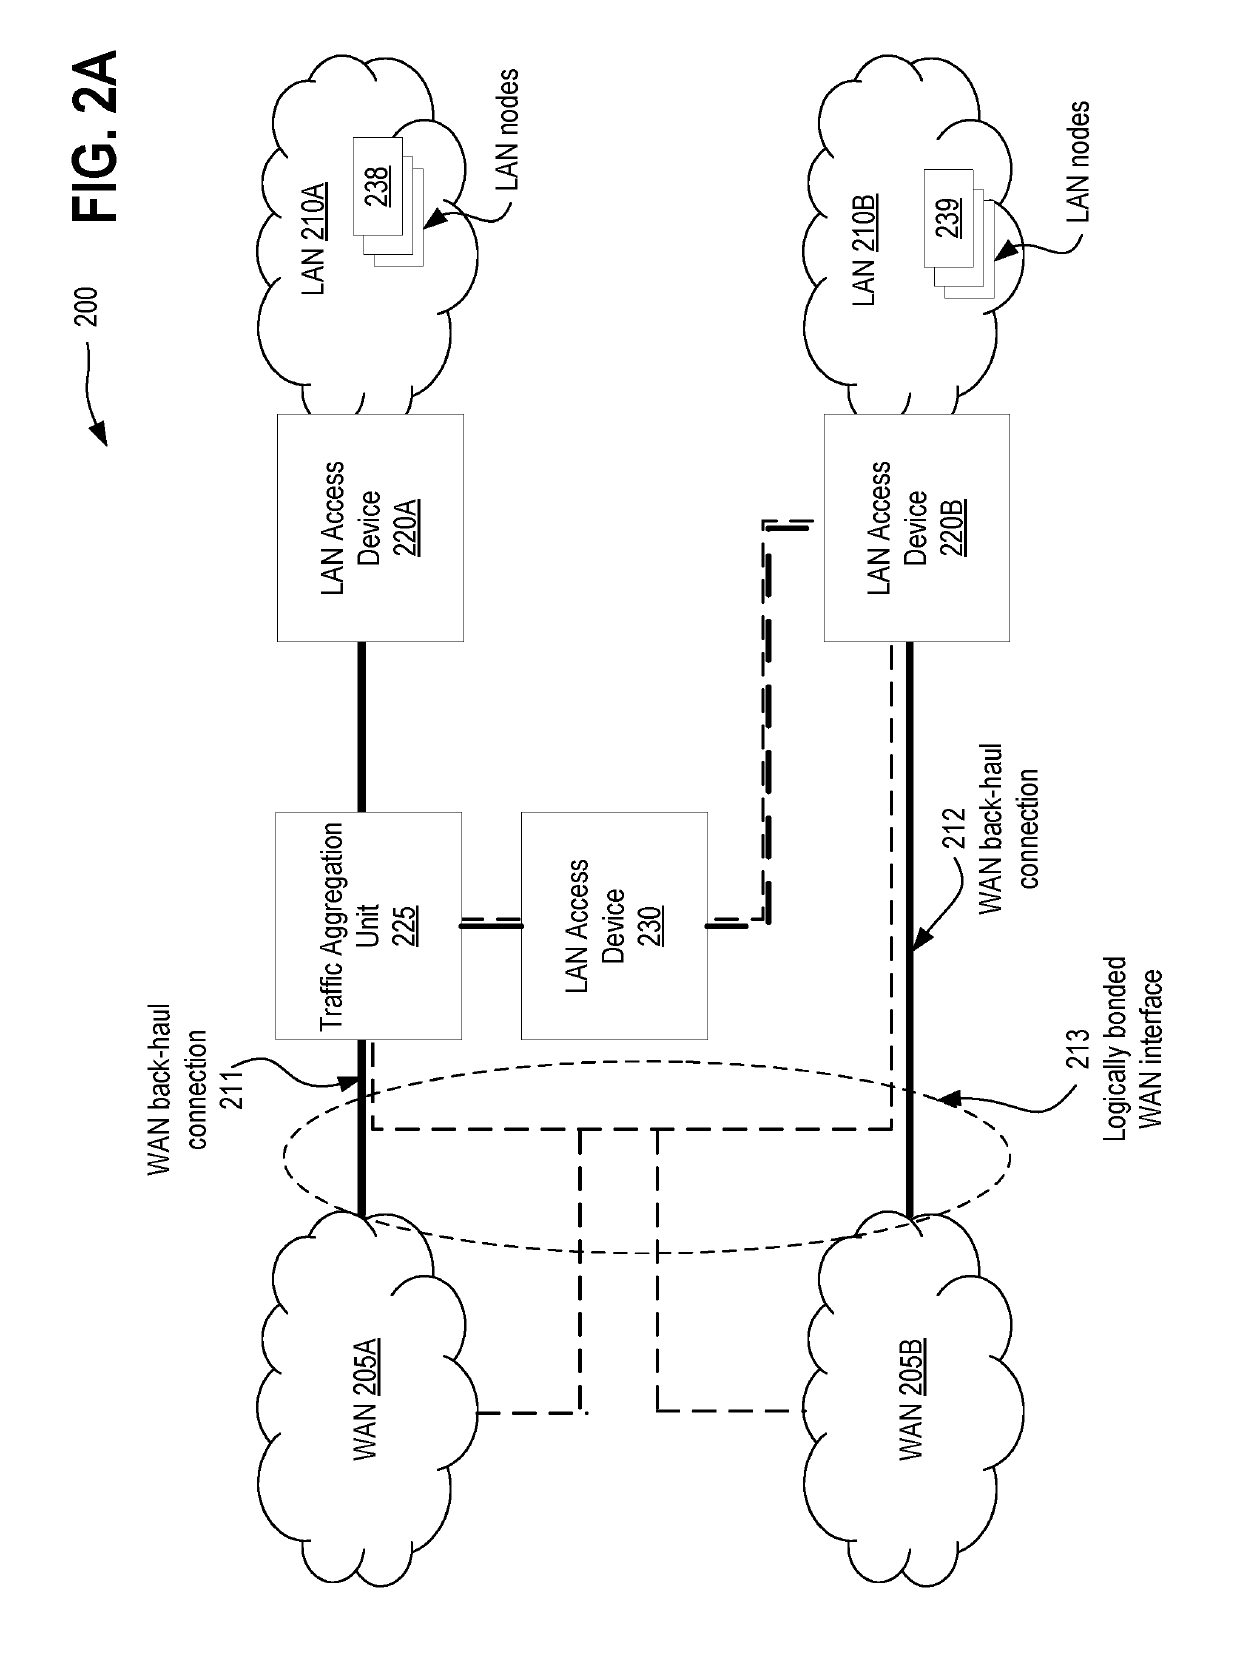 Systems and methods for traffic aggregation on multiple WAN backhauls and multiple distinct LAN networks